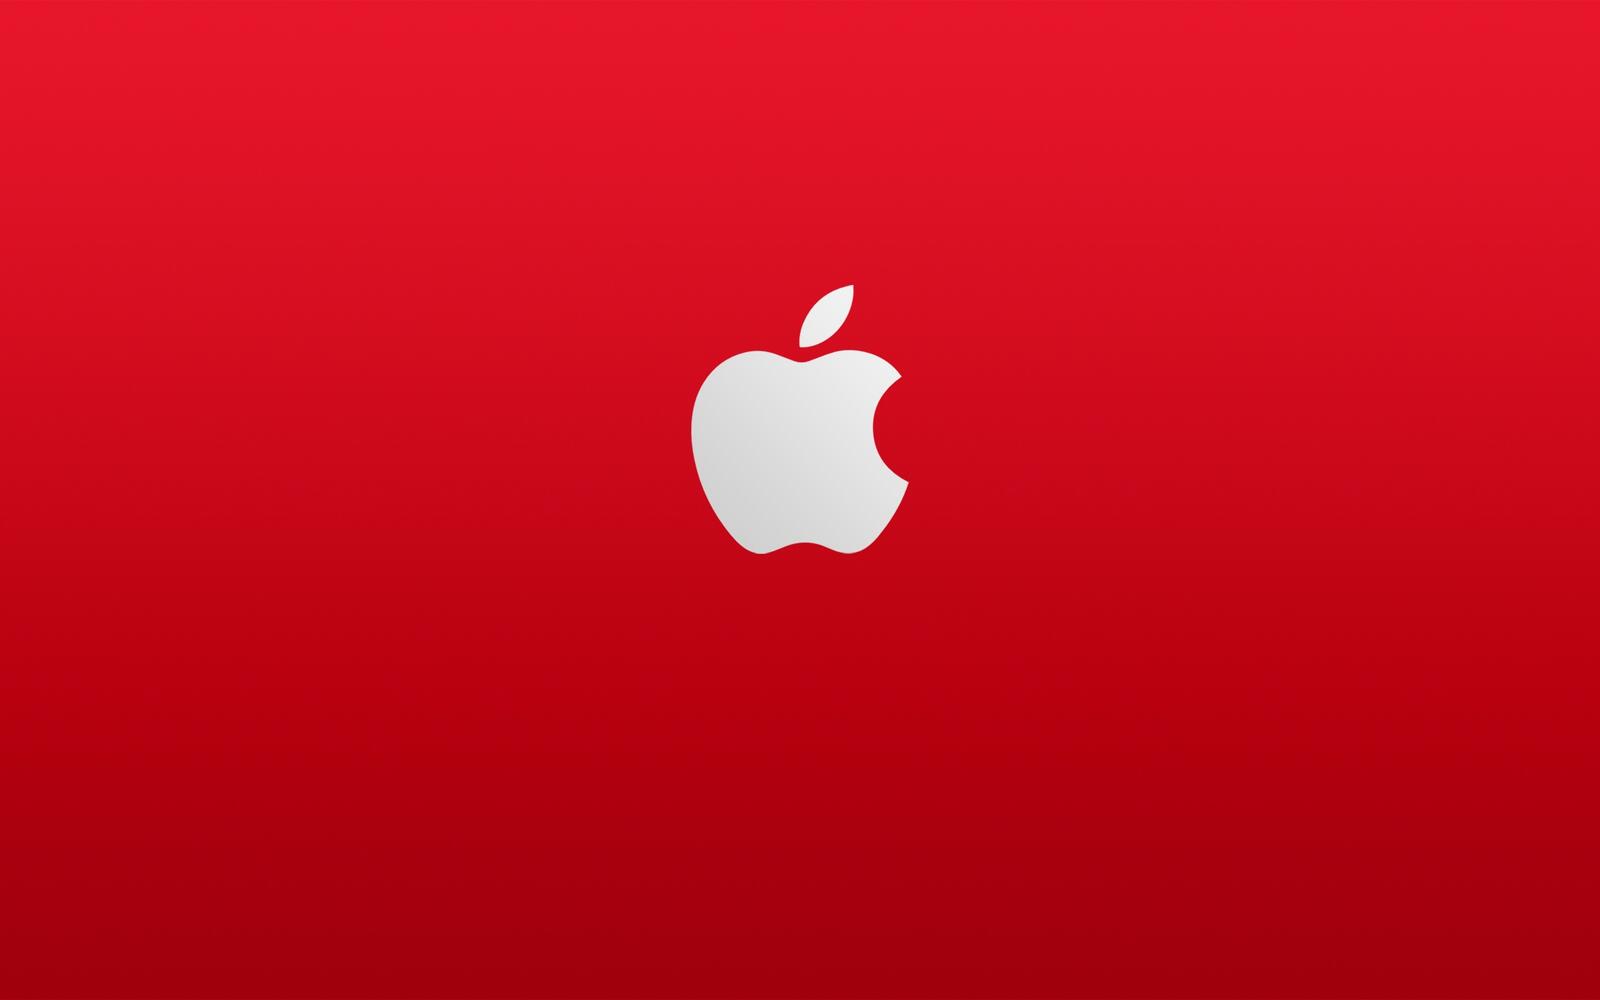 Free photo Apple logo on a red background